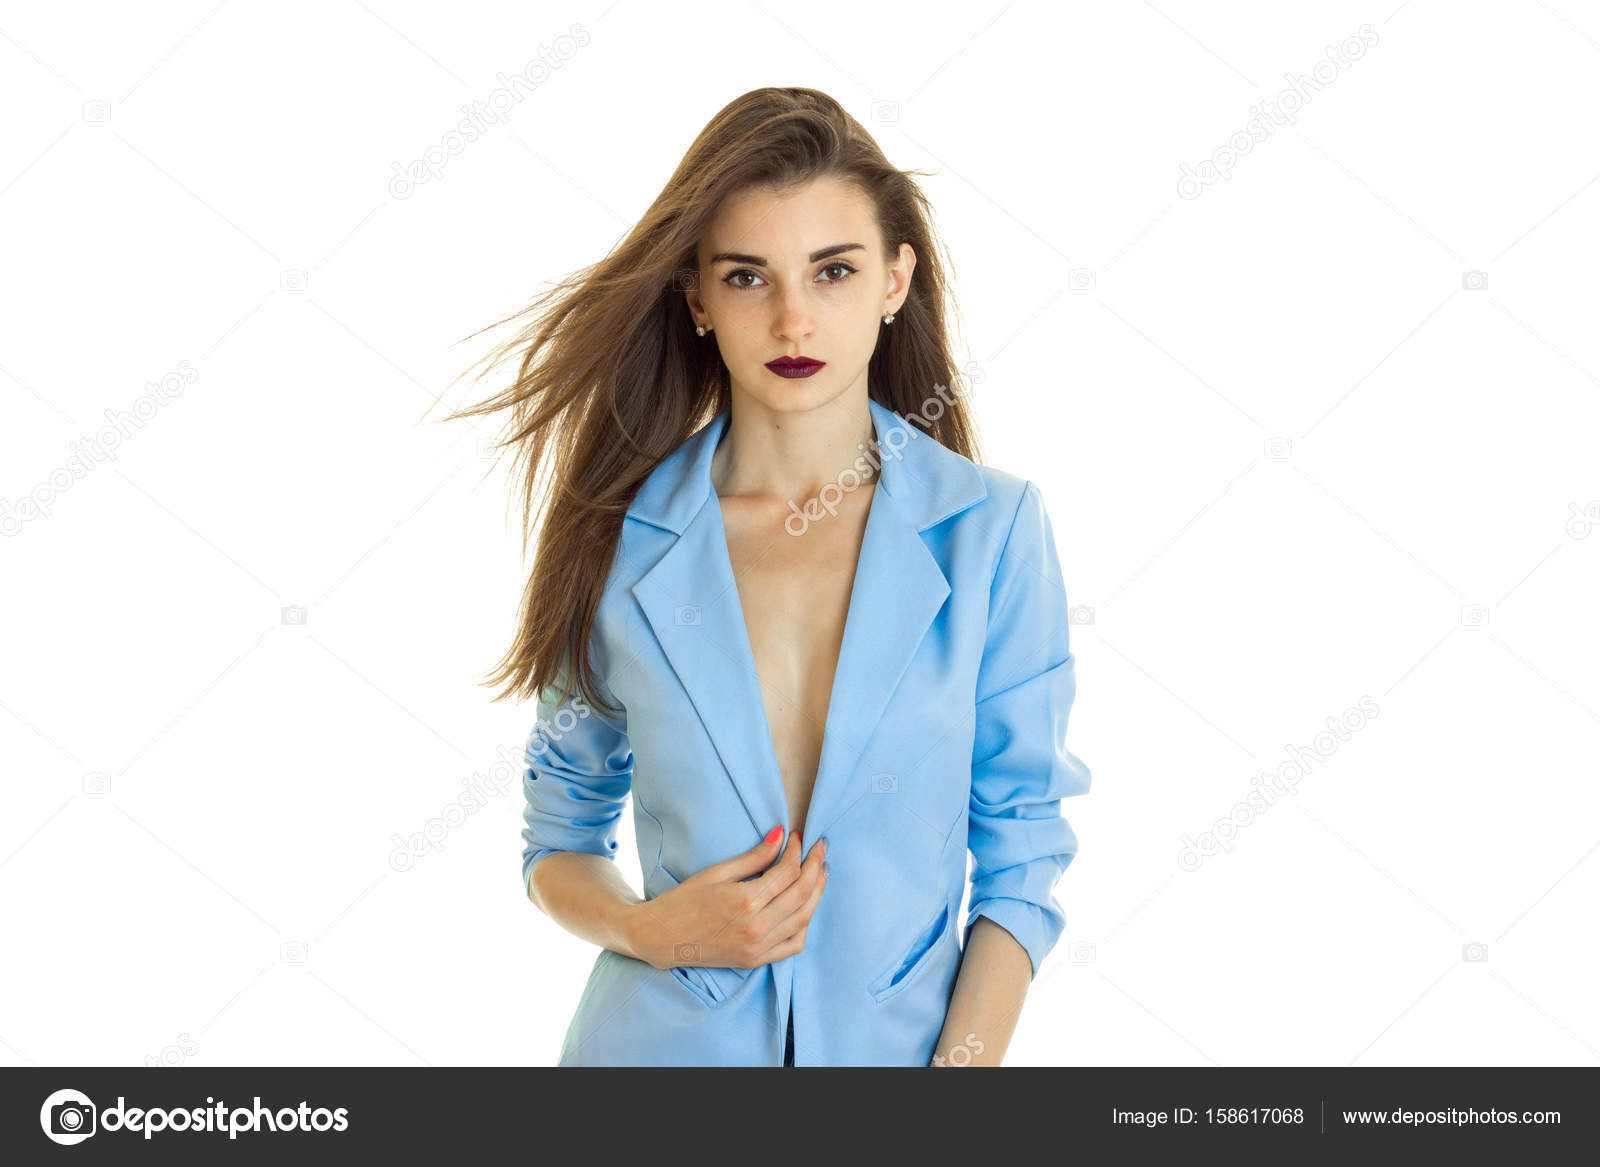 Gorgeous Business Girl In Blue Jacket Without Bra Isolated On